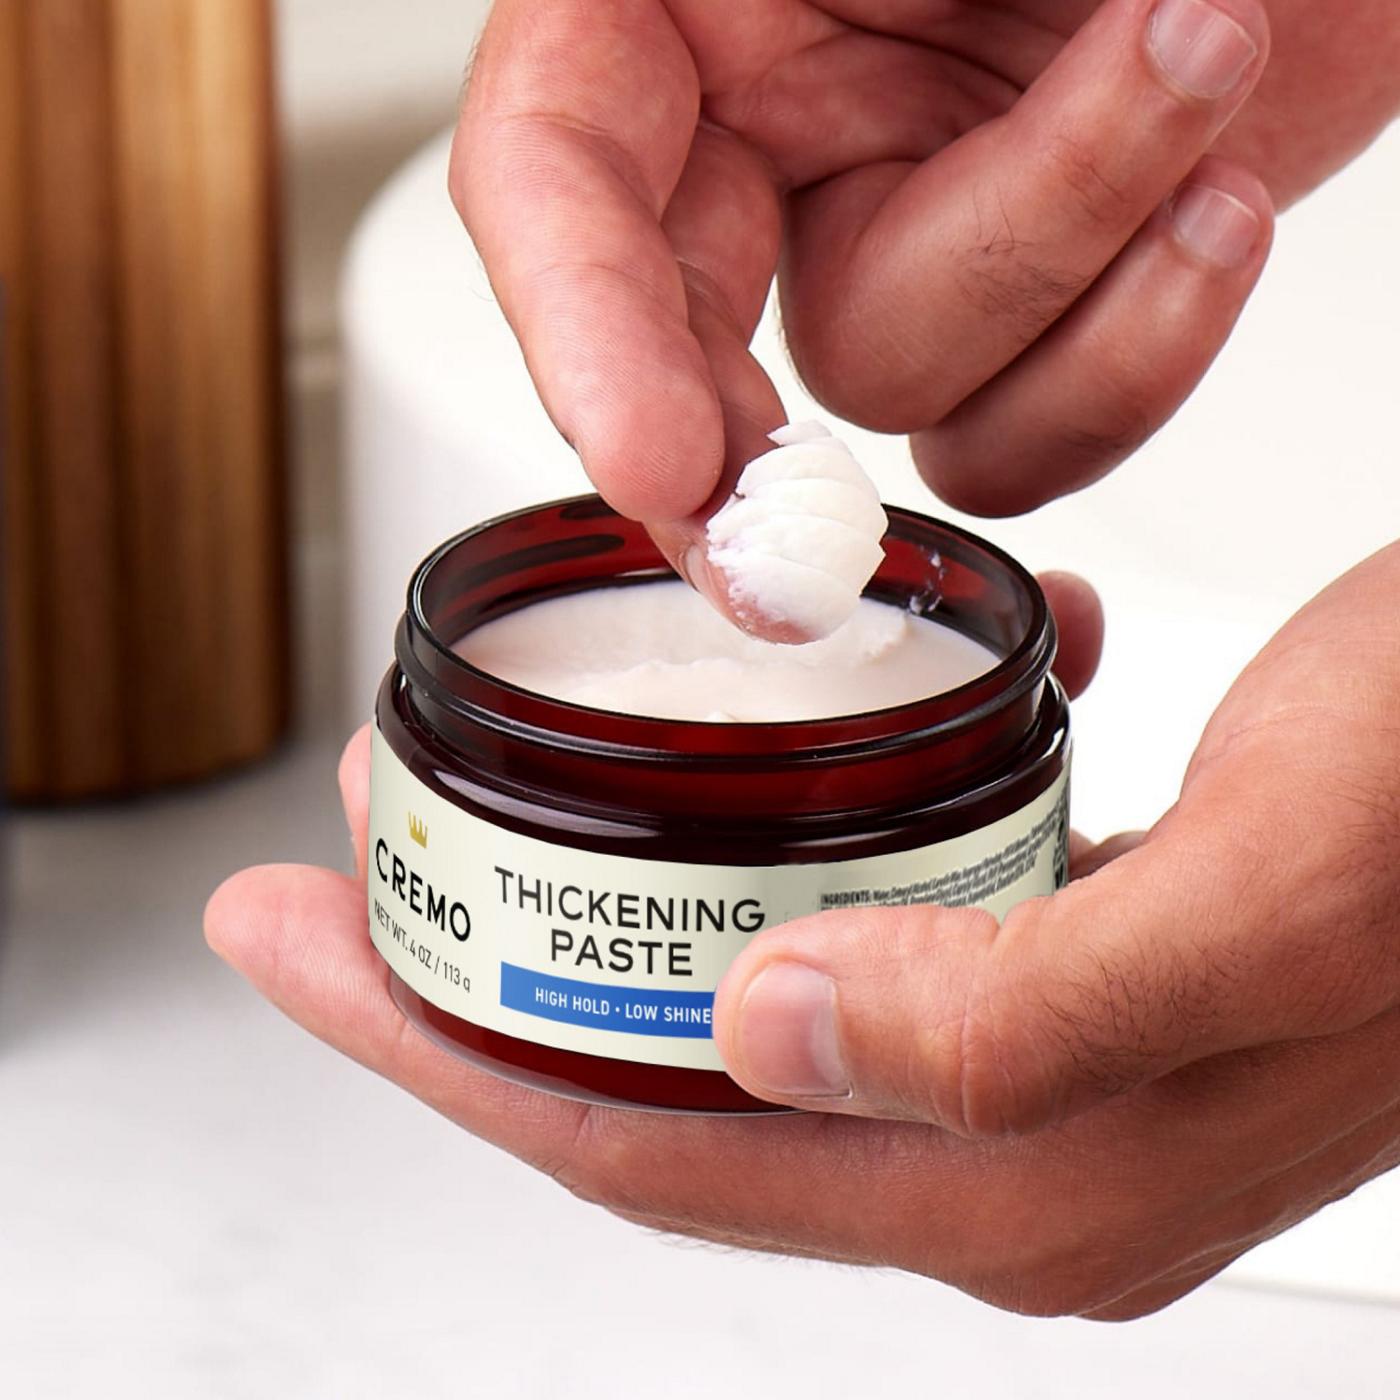 Cremo Hair Styling Pomade Thickening Paste; image 4 of 6